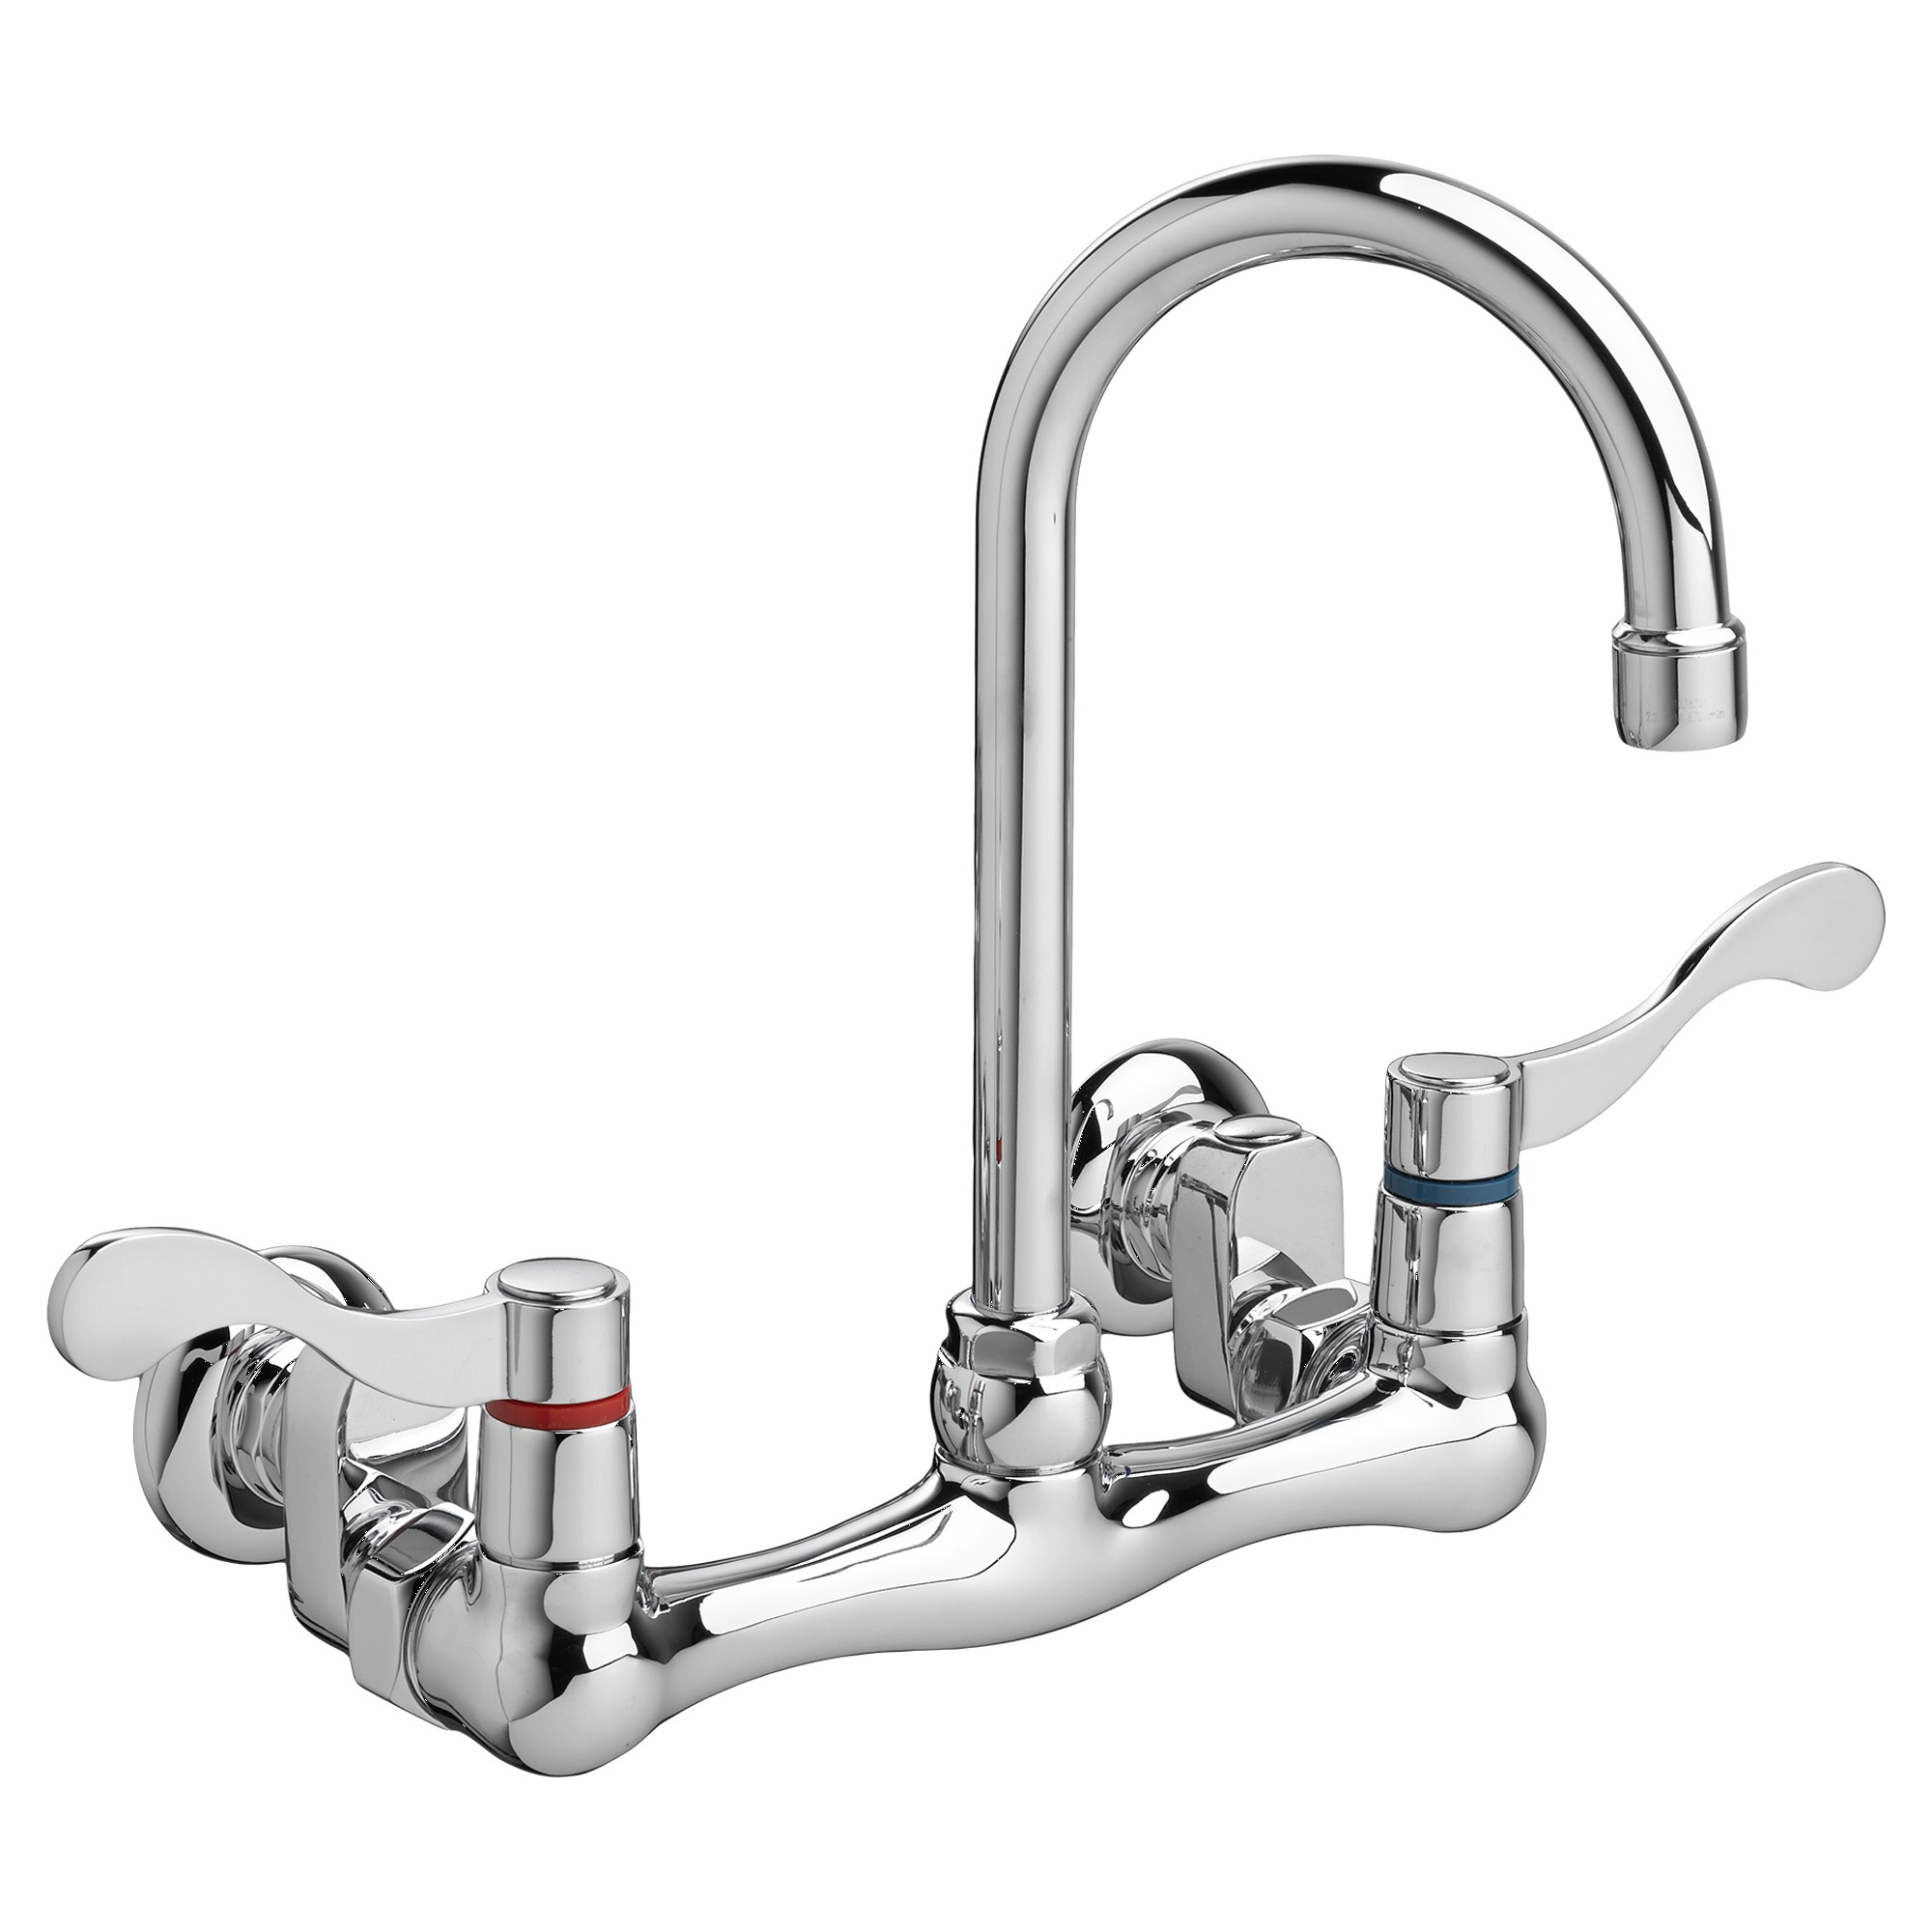 American Standard | 7293.172H.002 | AMERICAN STANDARD 7293.172H HERITAGE WALL-MOUNT 2-HANDLE GOOSENECK SERVICE SINK FAUCET WITH INTEGRAL STOPS CP 002 CHROME 2.2GPM